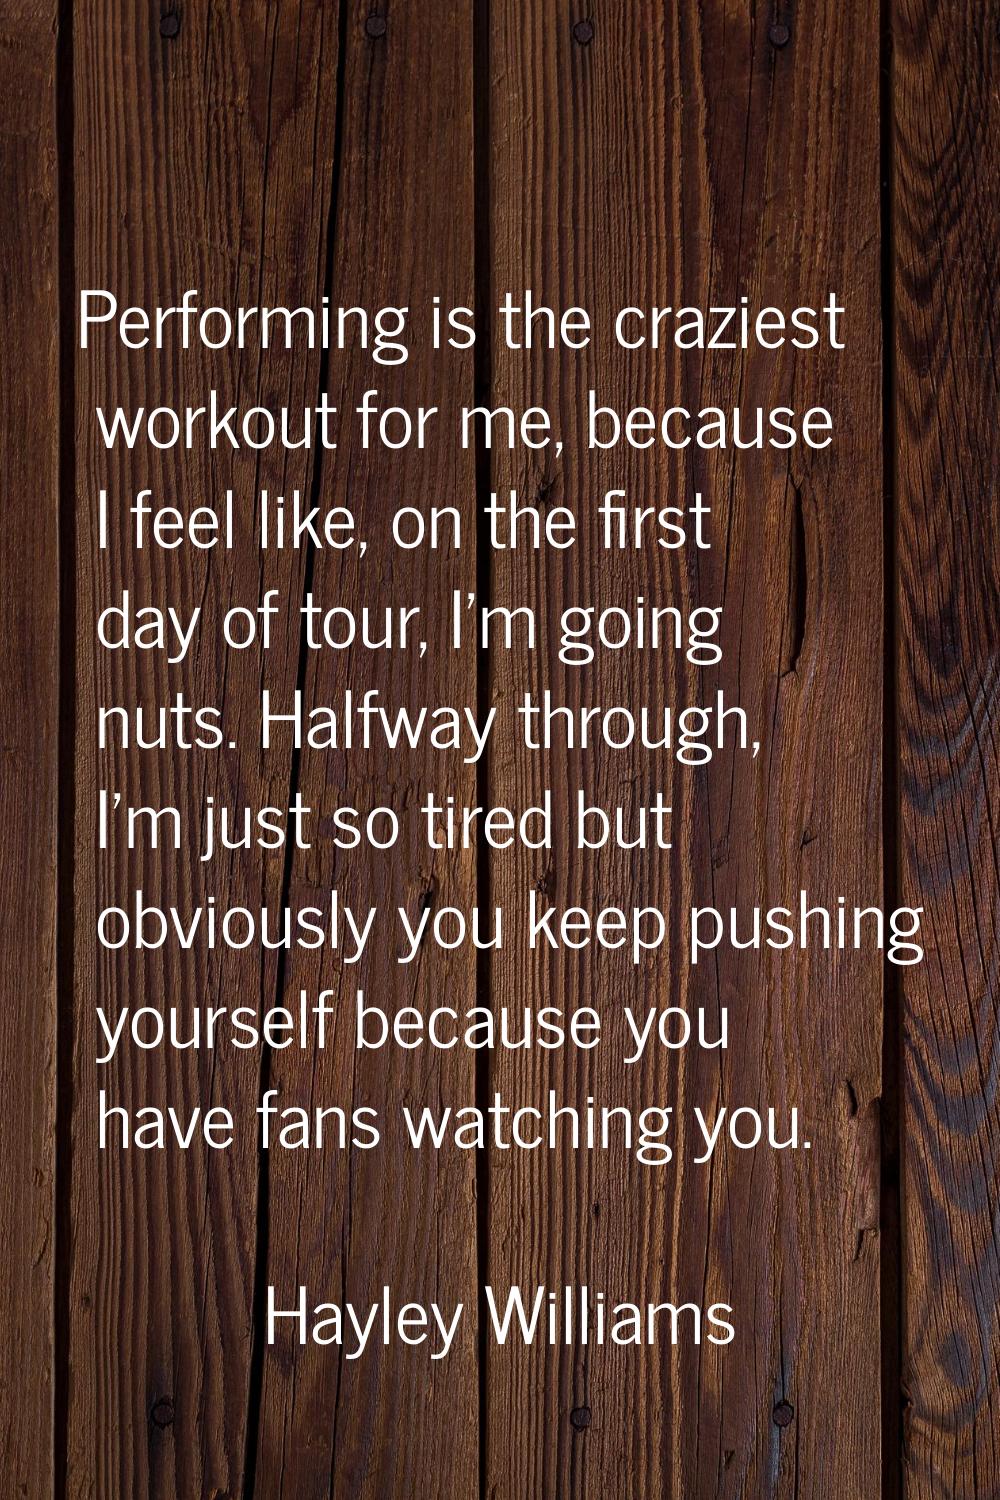 Performing is the craziest workout for me, because I feel like, on the first day of tour, I'm going